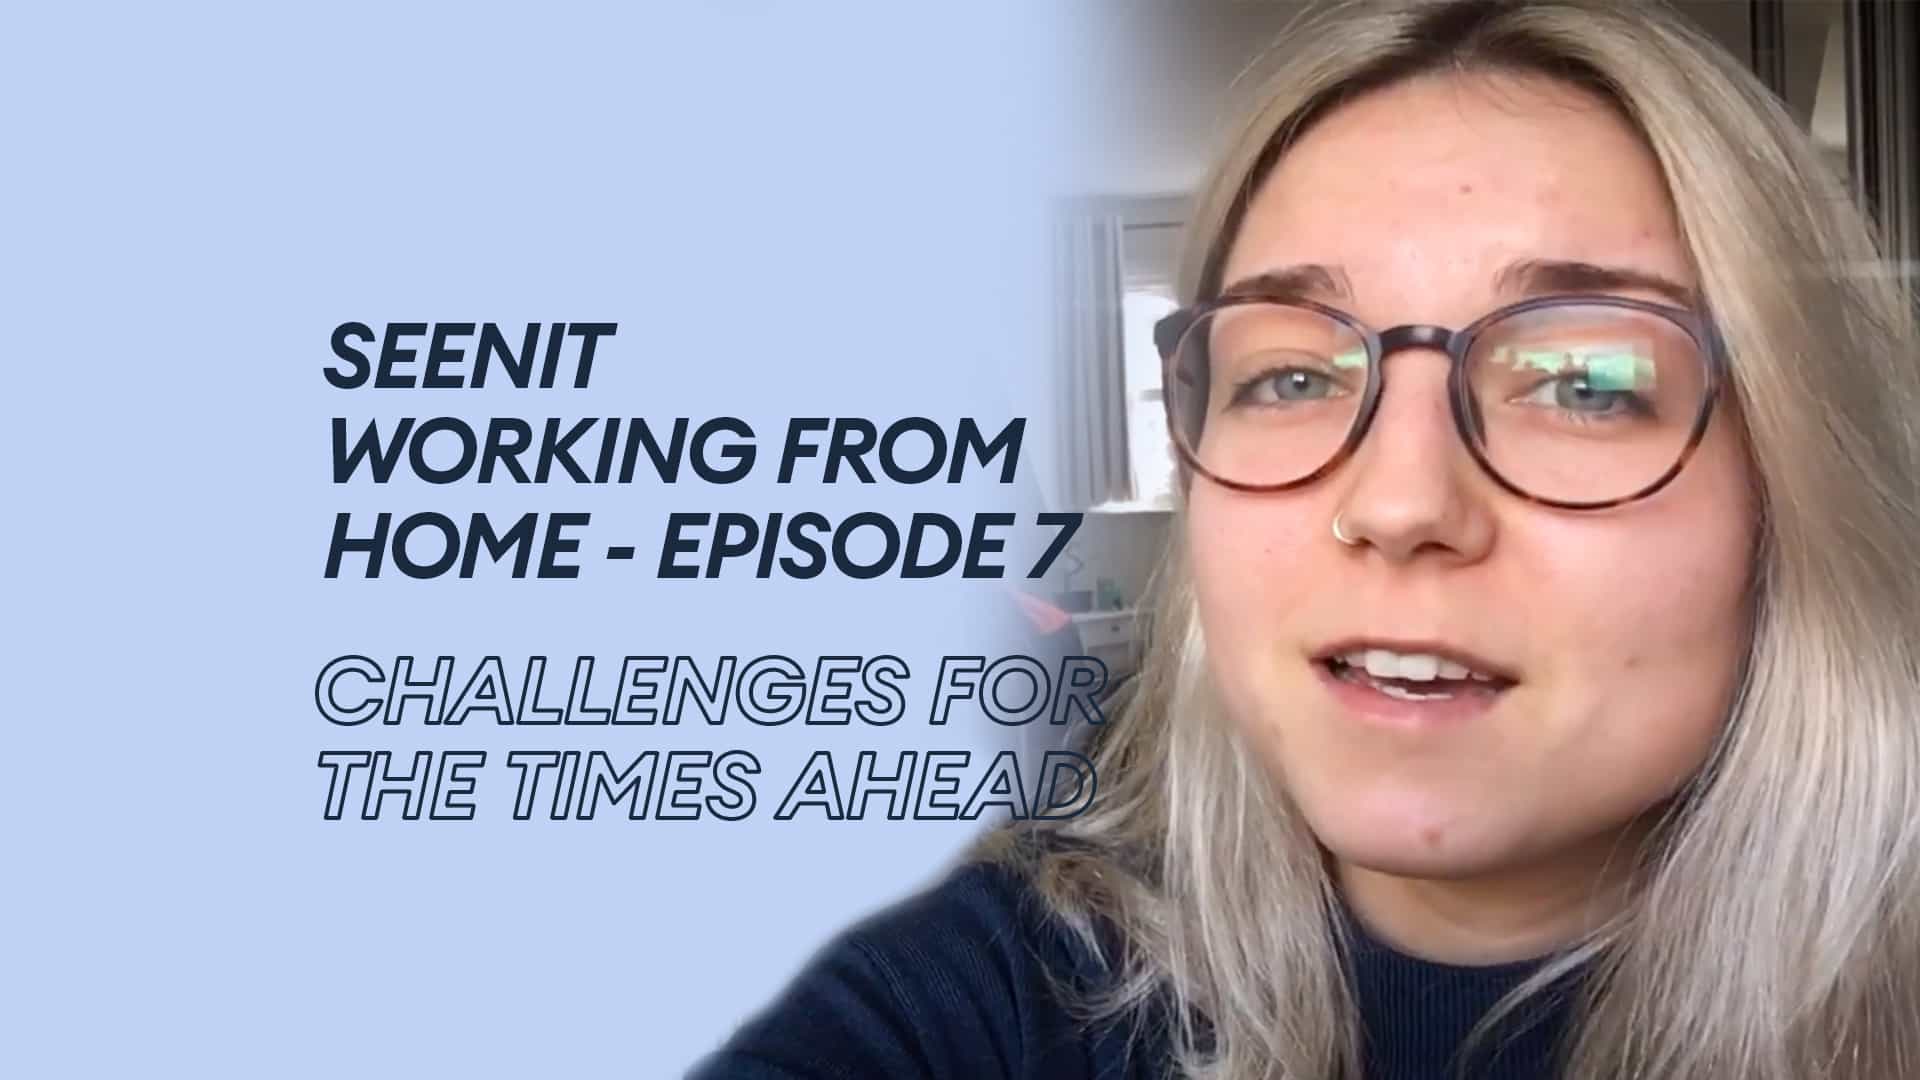 Our challenges for the times ahead hero image